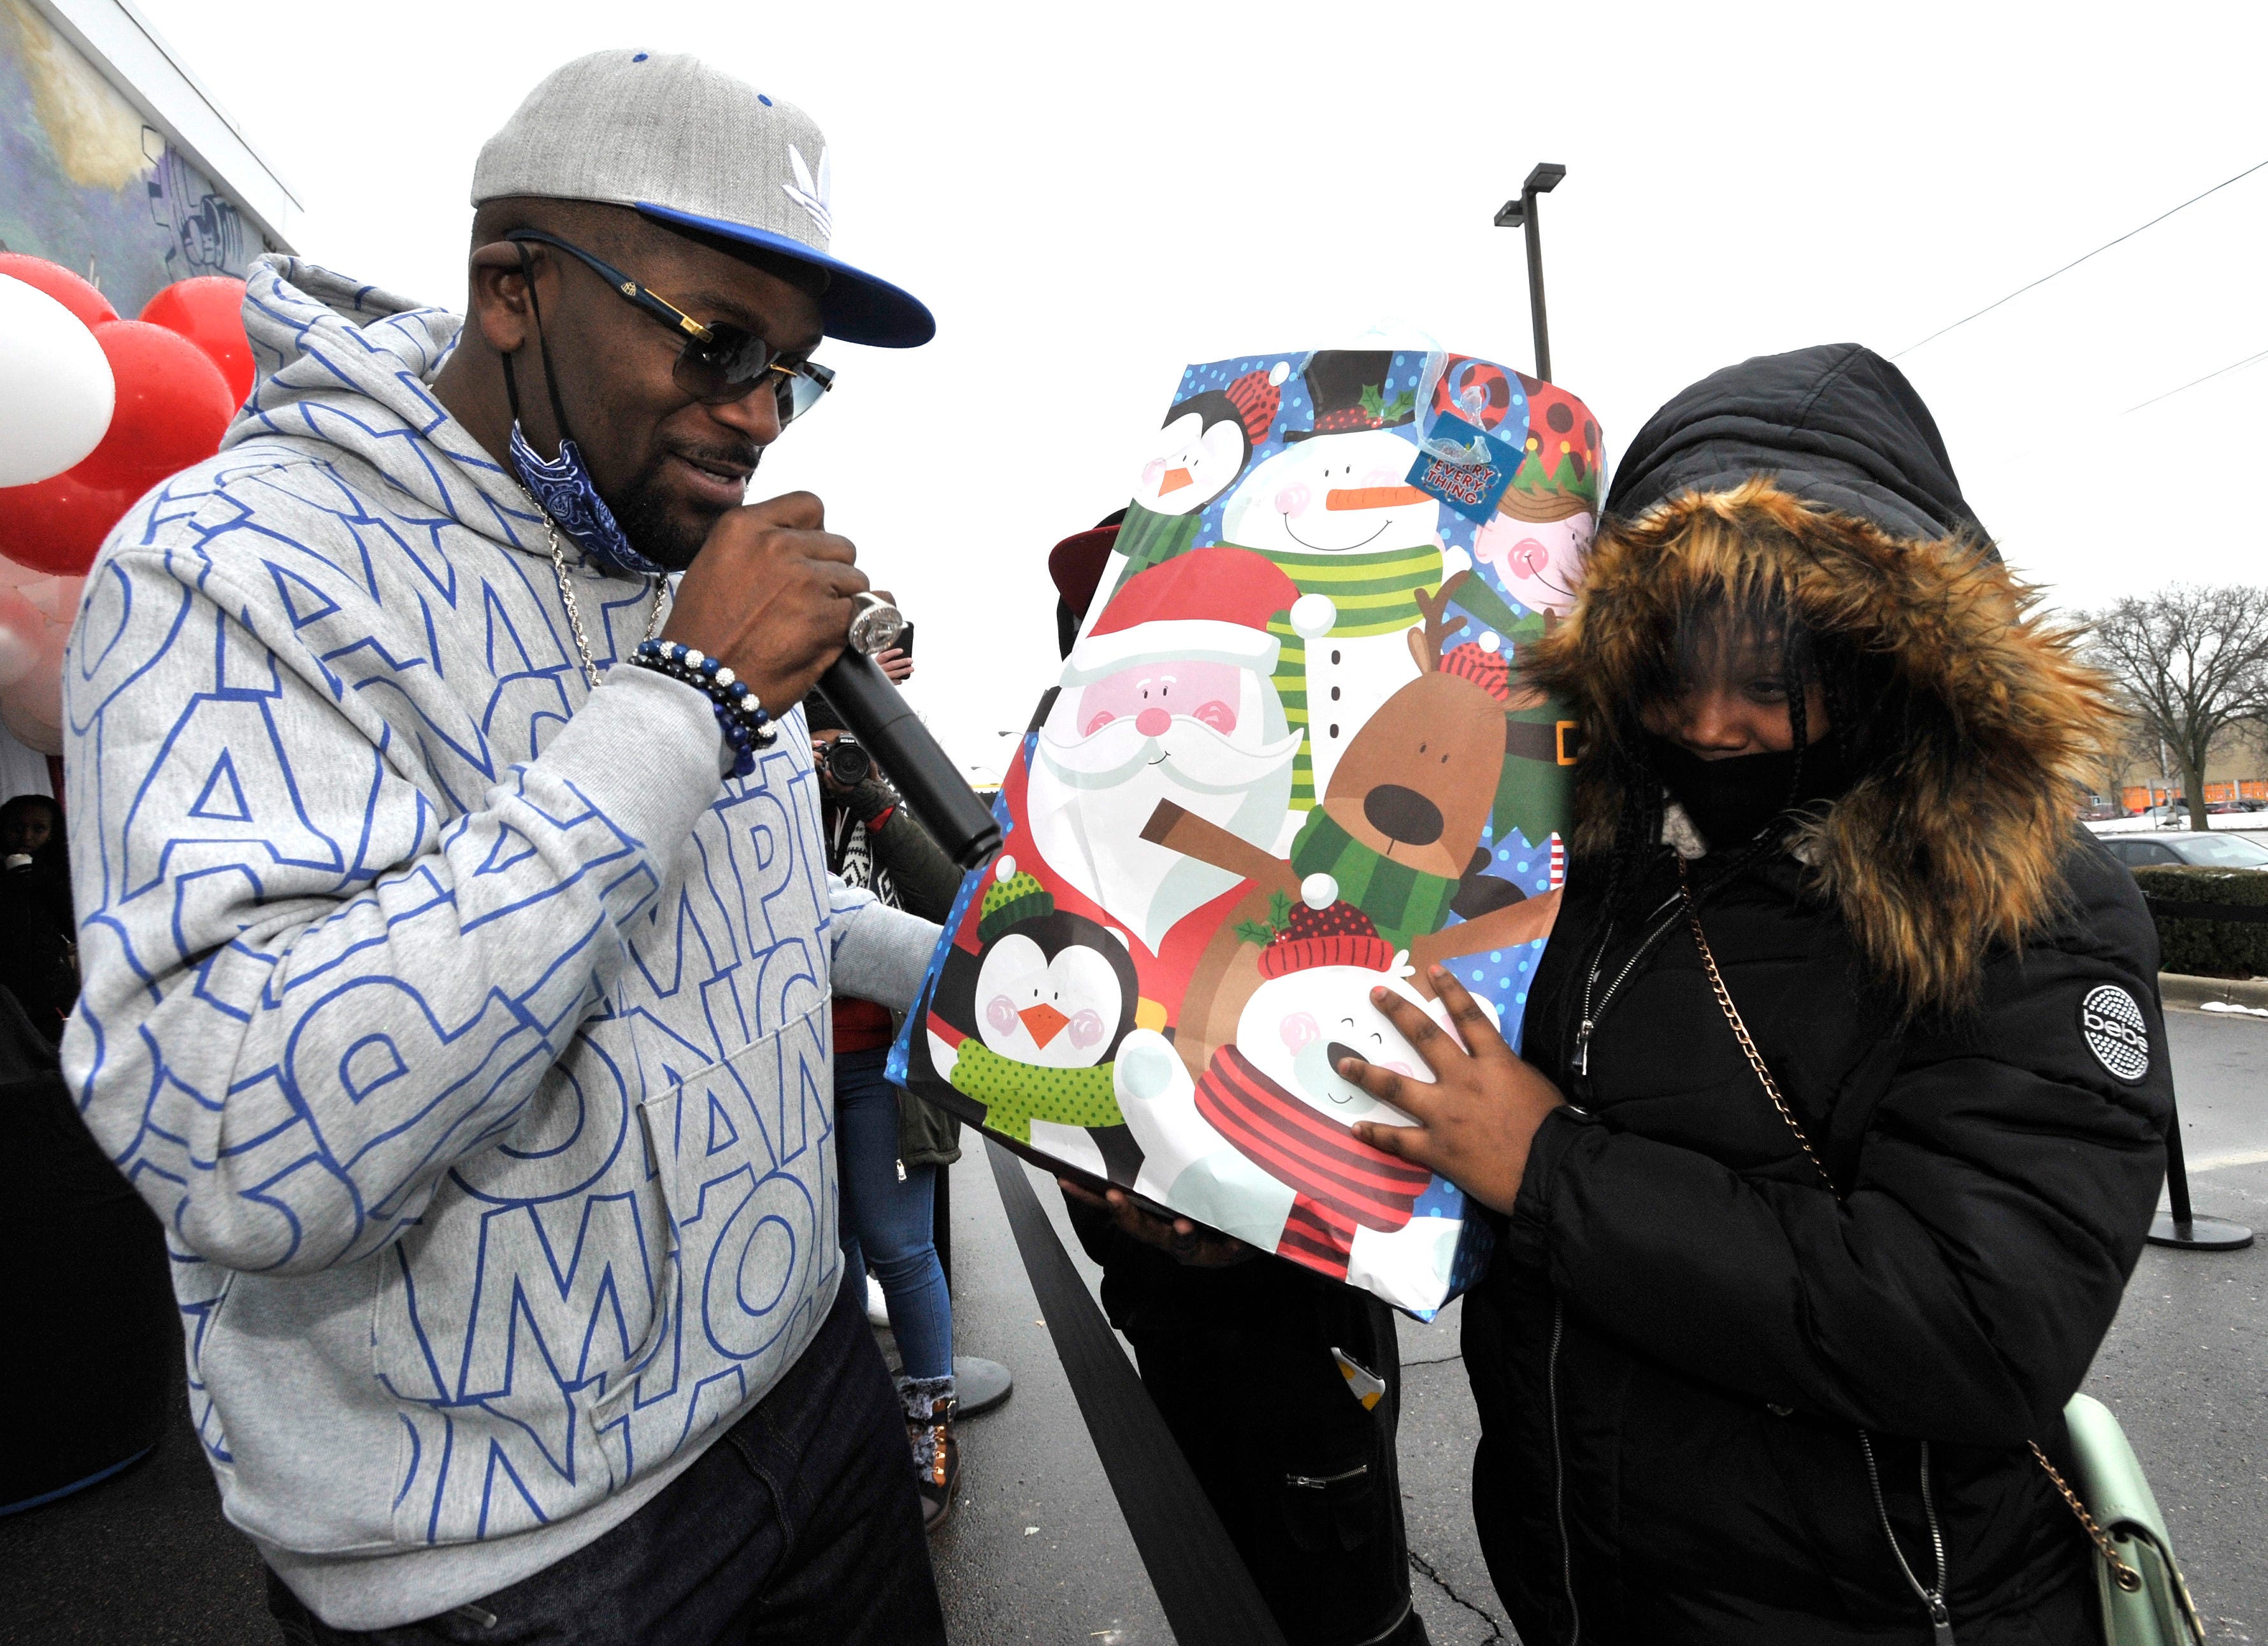 Trick Trick, aka Christian Mathis, works with Detroit Phoenix Center founder and CEO Courtney Smith and others as they hand out gifts in December 2020 at a DPC event to help out homeless or living in poverty. The hip-hop artist will narrate his own story for the FX series